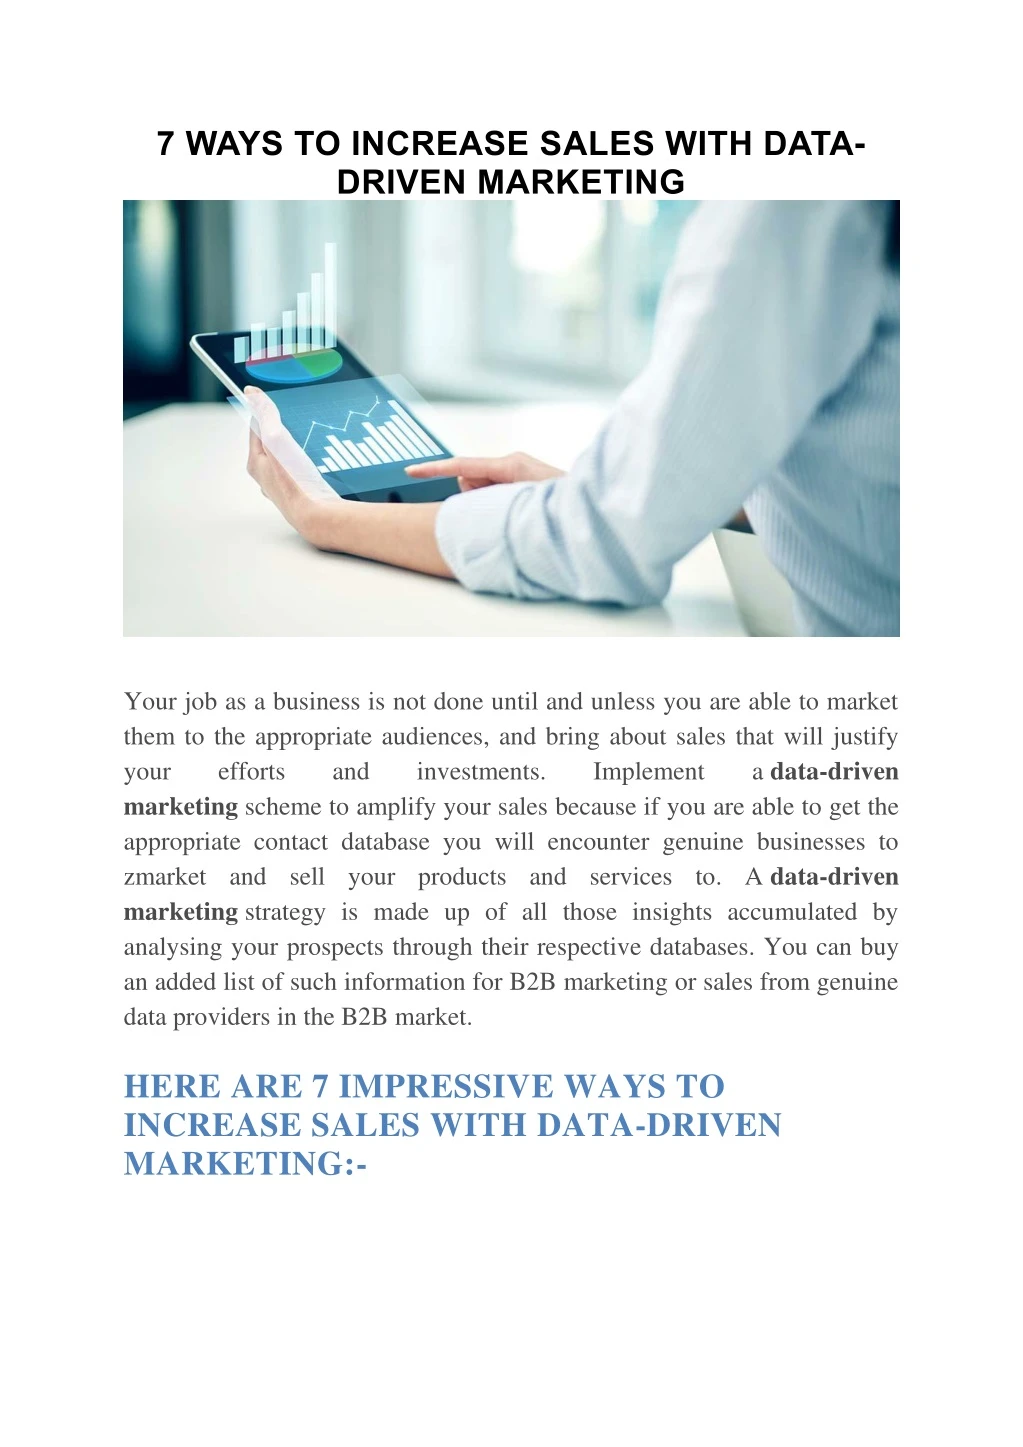 7 ways to increase sales with data driven